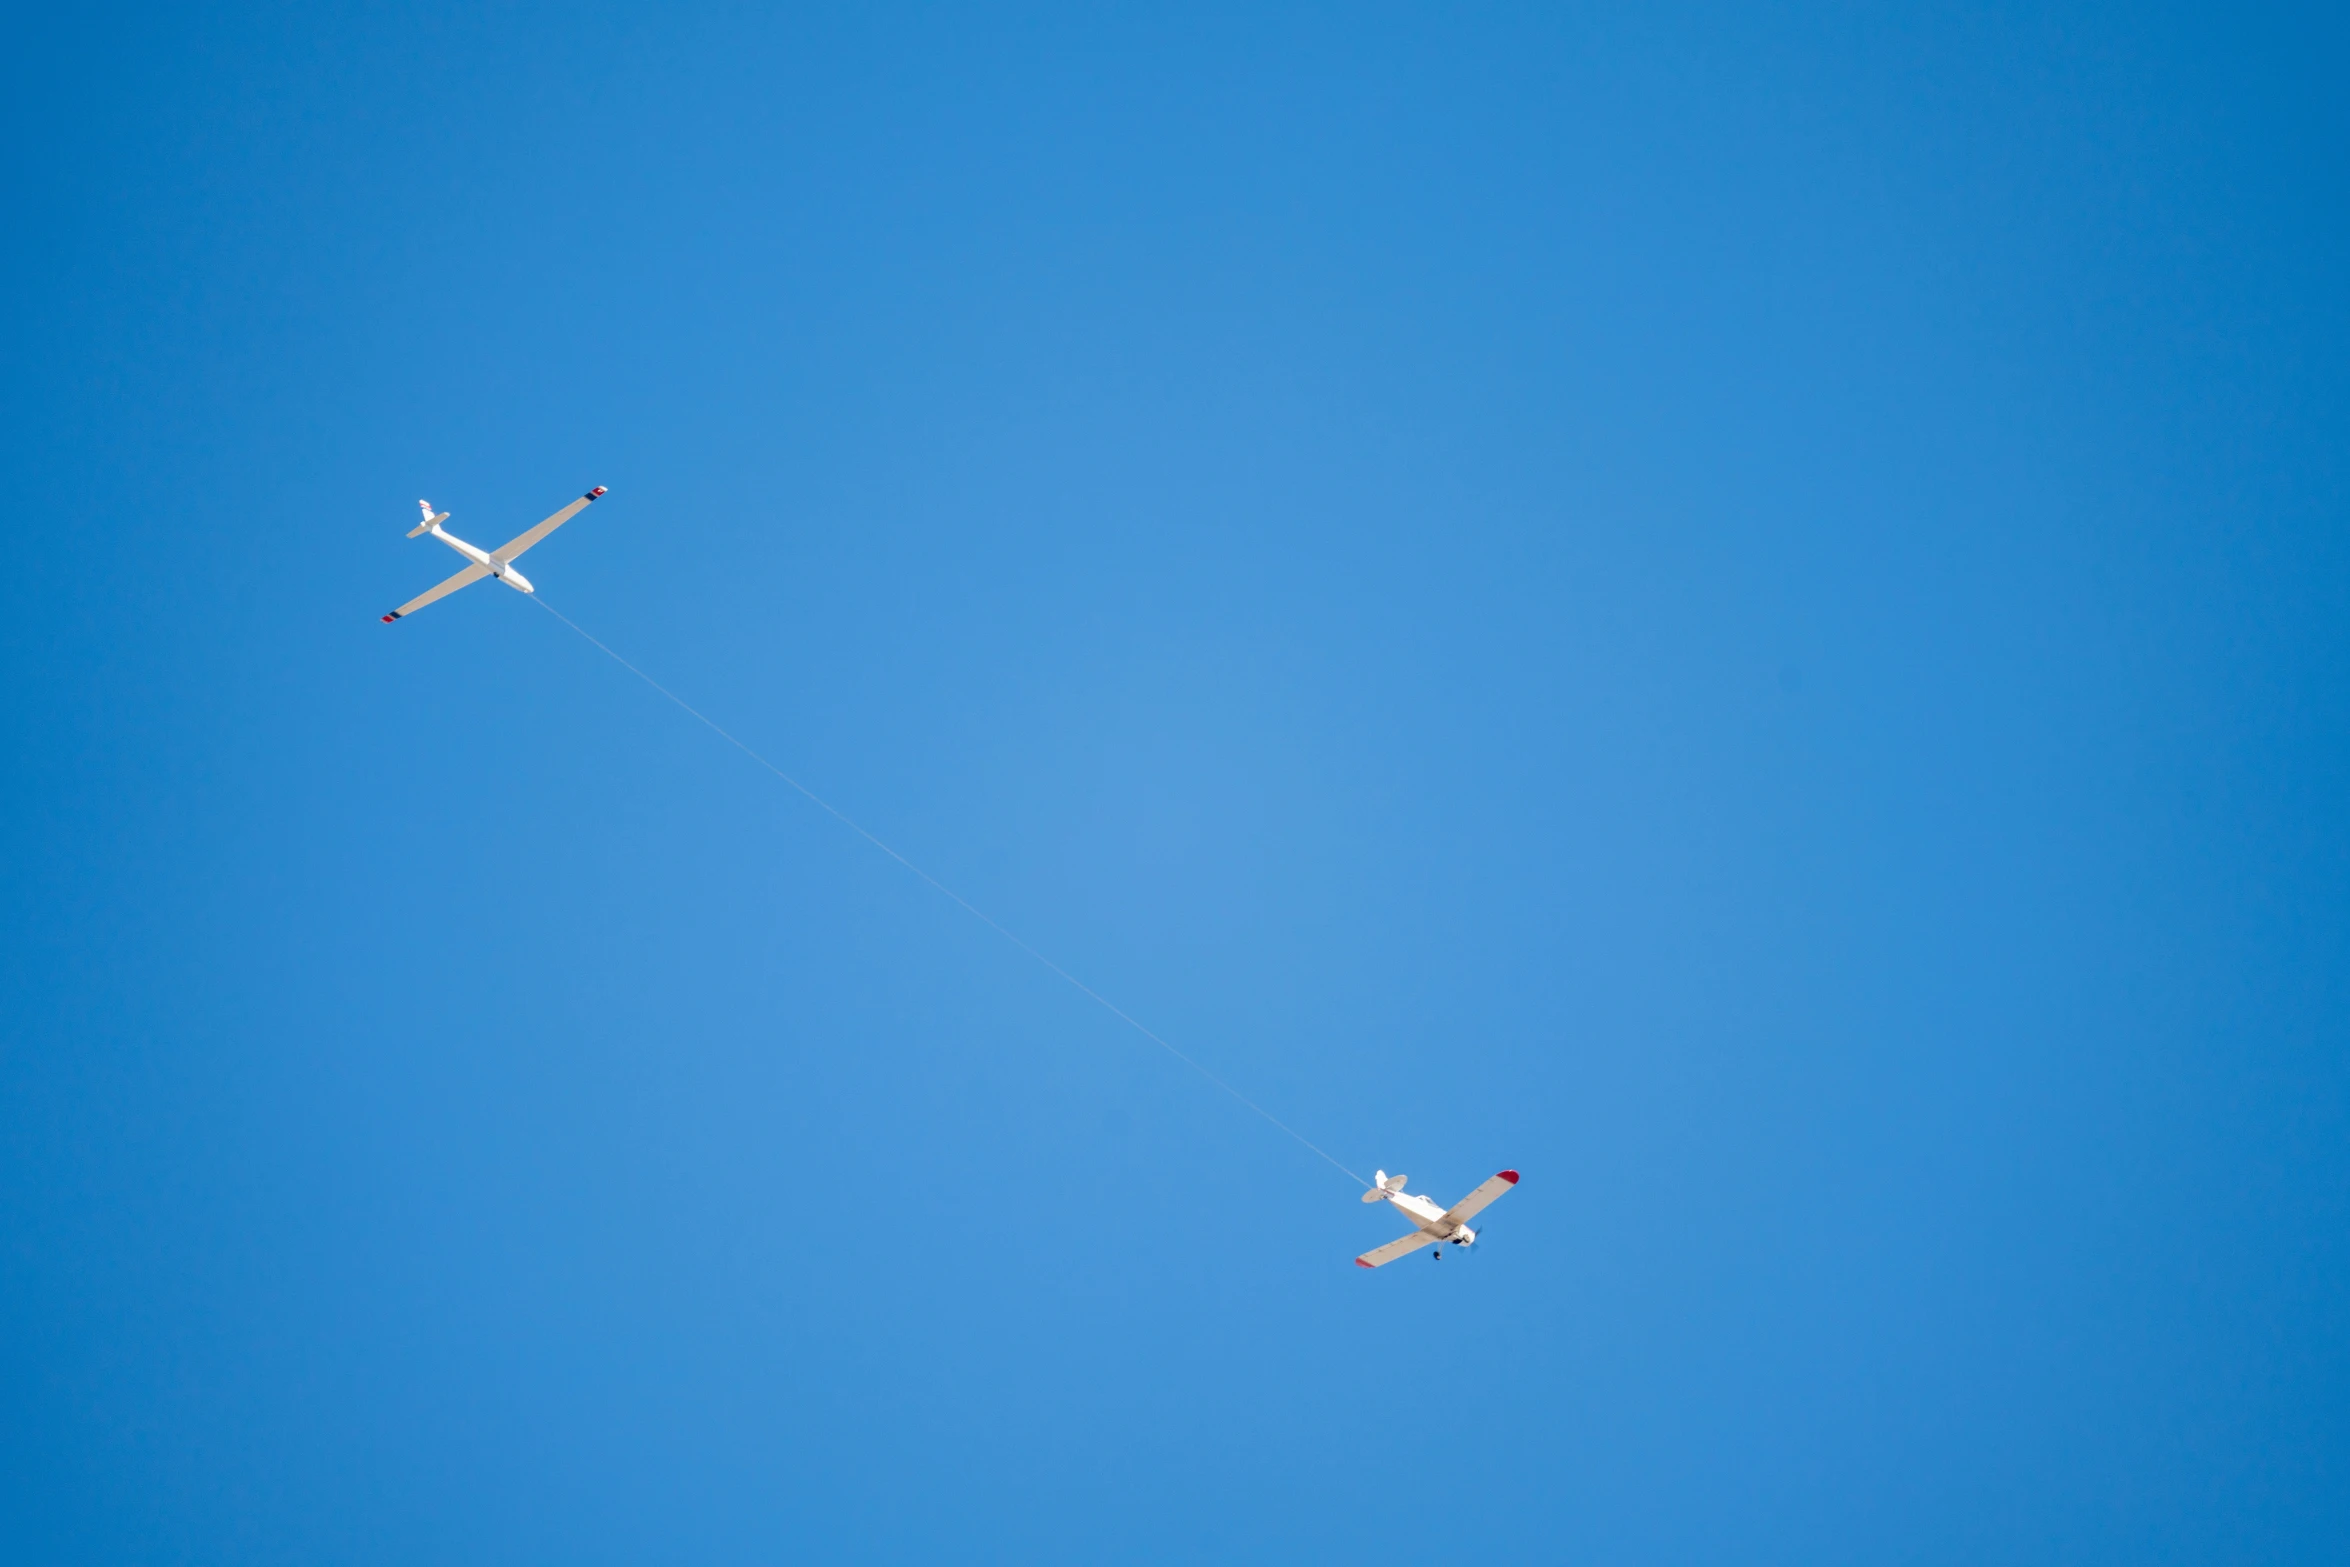 two planes are flying in the blue sky